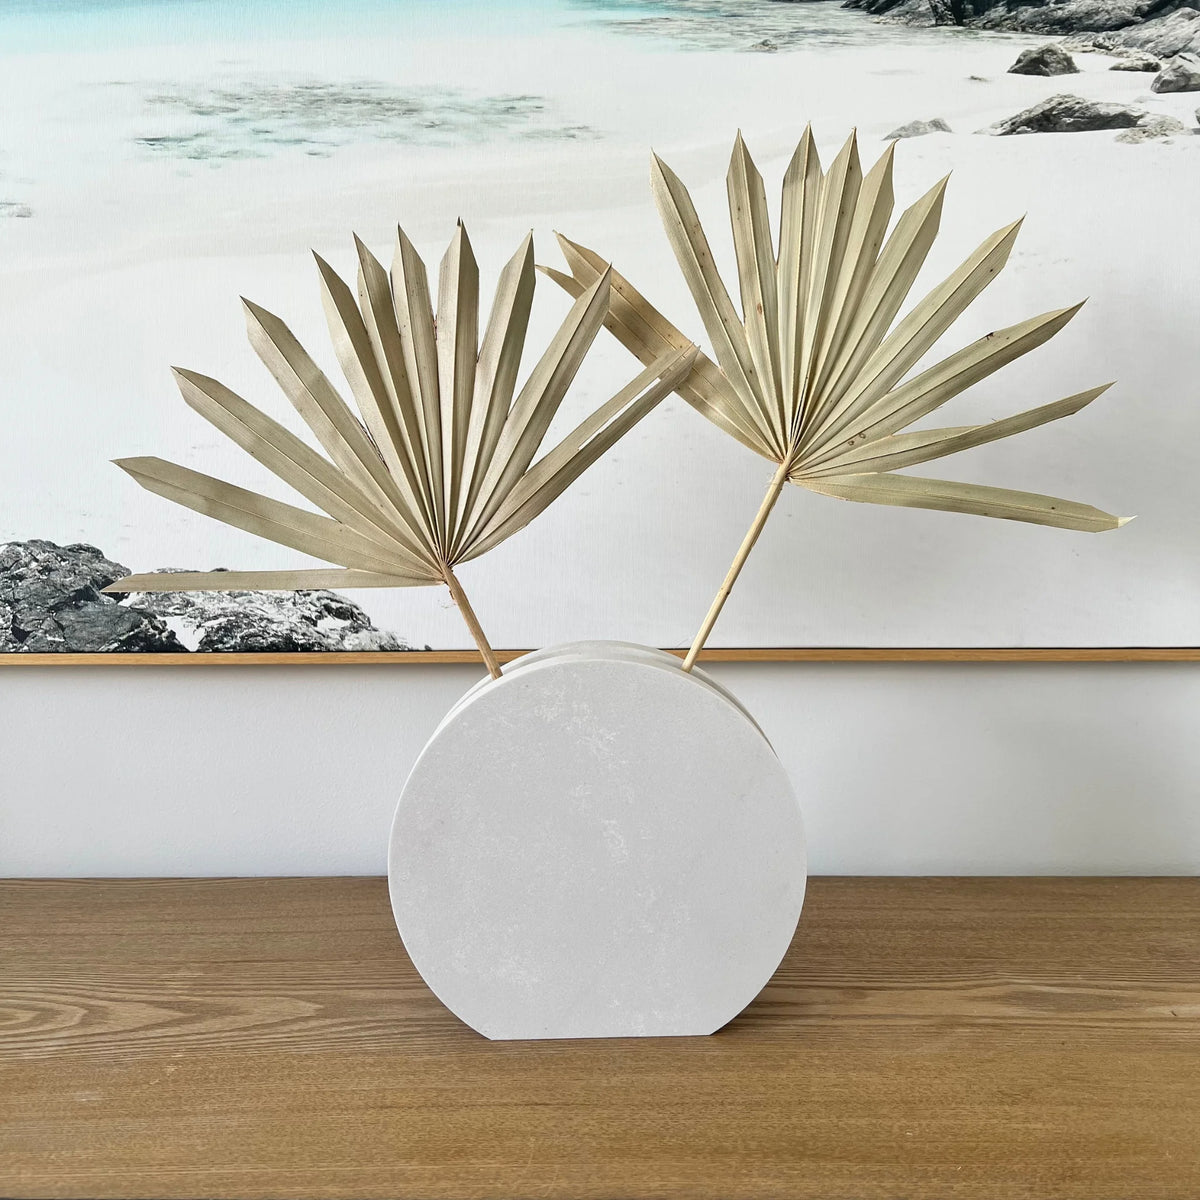 Image of Round Vase used to display dried palm leaves, a timeless display piece. Crafted from durable stone, evoking a luxurious contemporary feel. Available in Cloudburst Concrete by Caesarstone - soft swells of pure white that veil a solid, creamy base, for an infinitely beautiful surface. An ideal decorative accent.